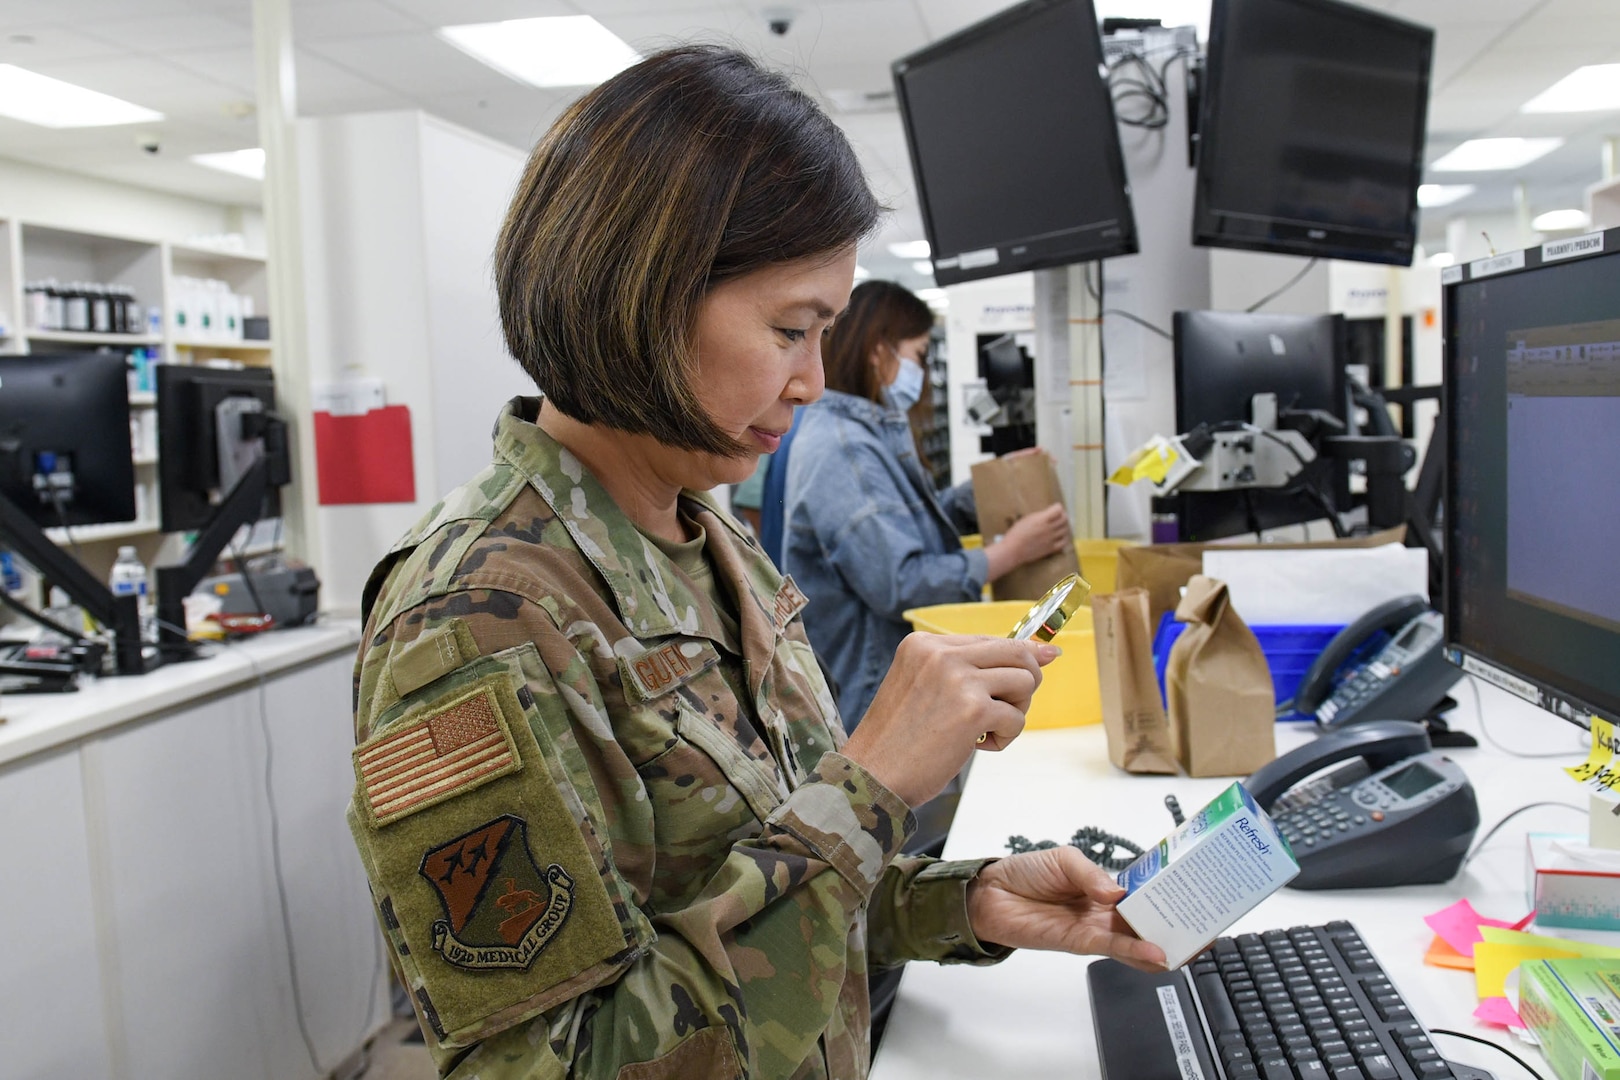 U.S. Air Force Maj. Nhon Nguyen, an anesthesiologist assigned to the 192nd Medical Group, works in the pharmacy during their Medical Facility Annual Training (MFAT) Aug. 23, 2023, at Naval Medical Center San Diego, California.